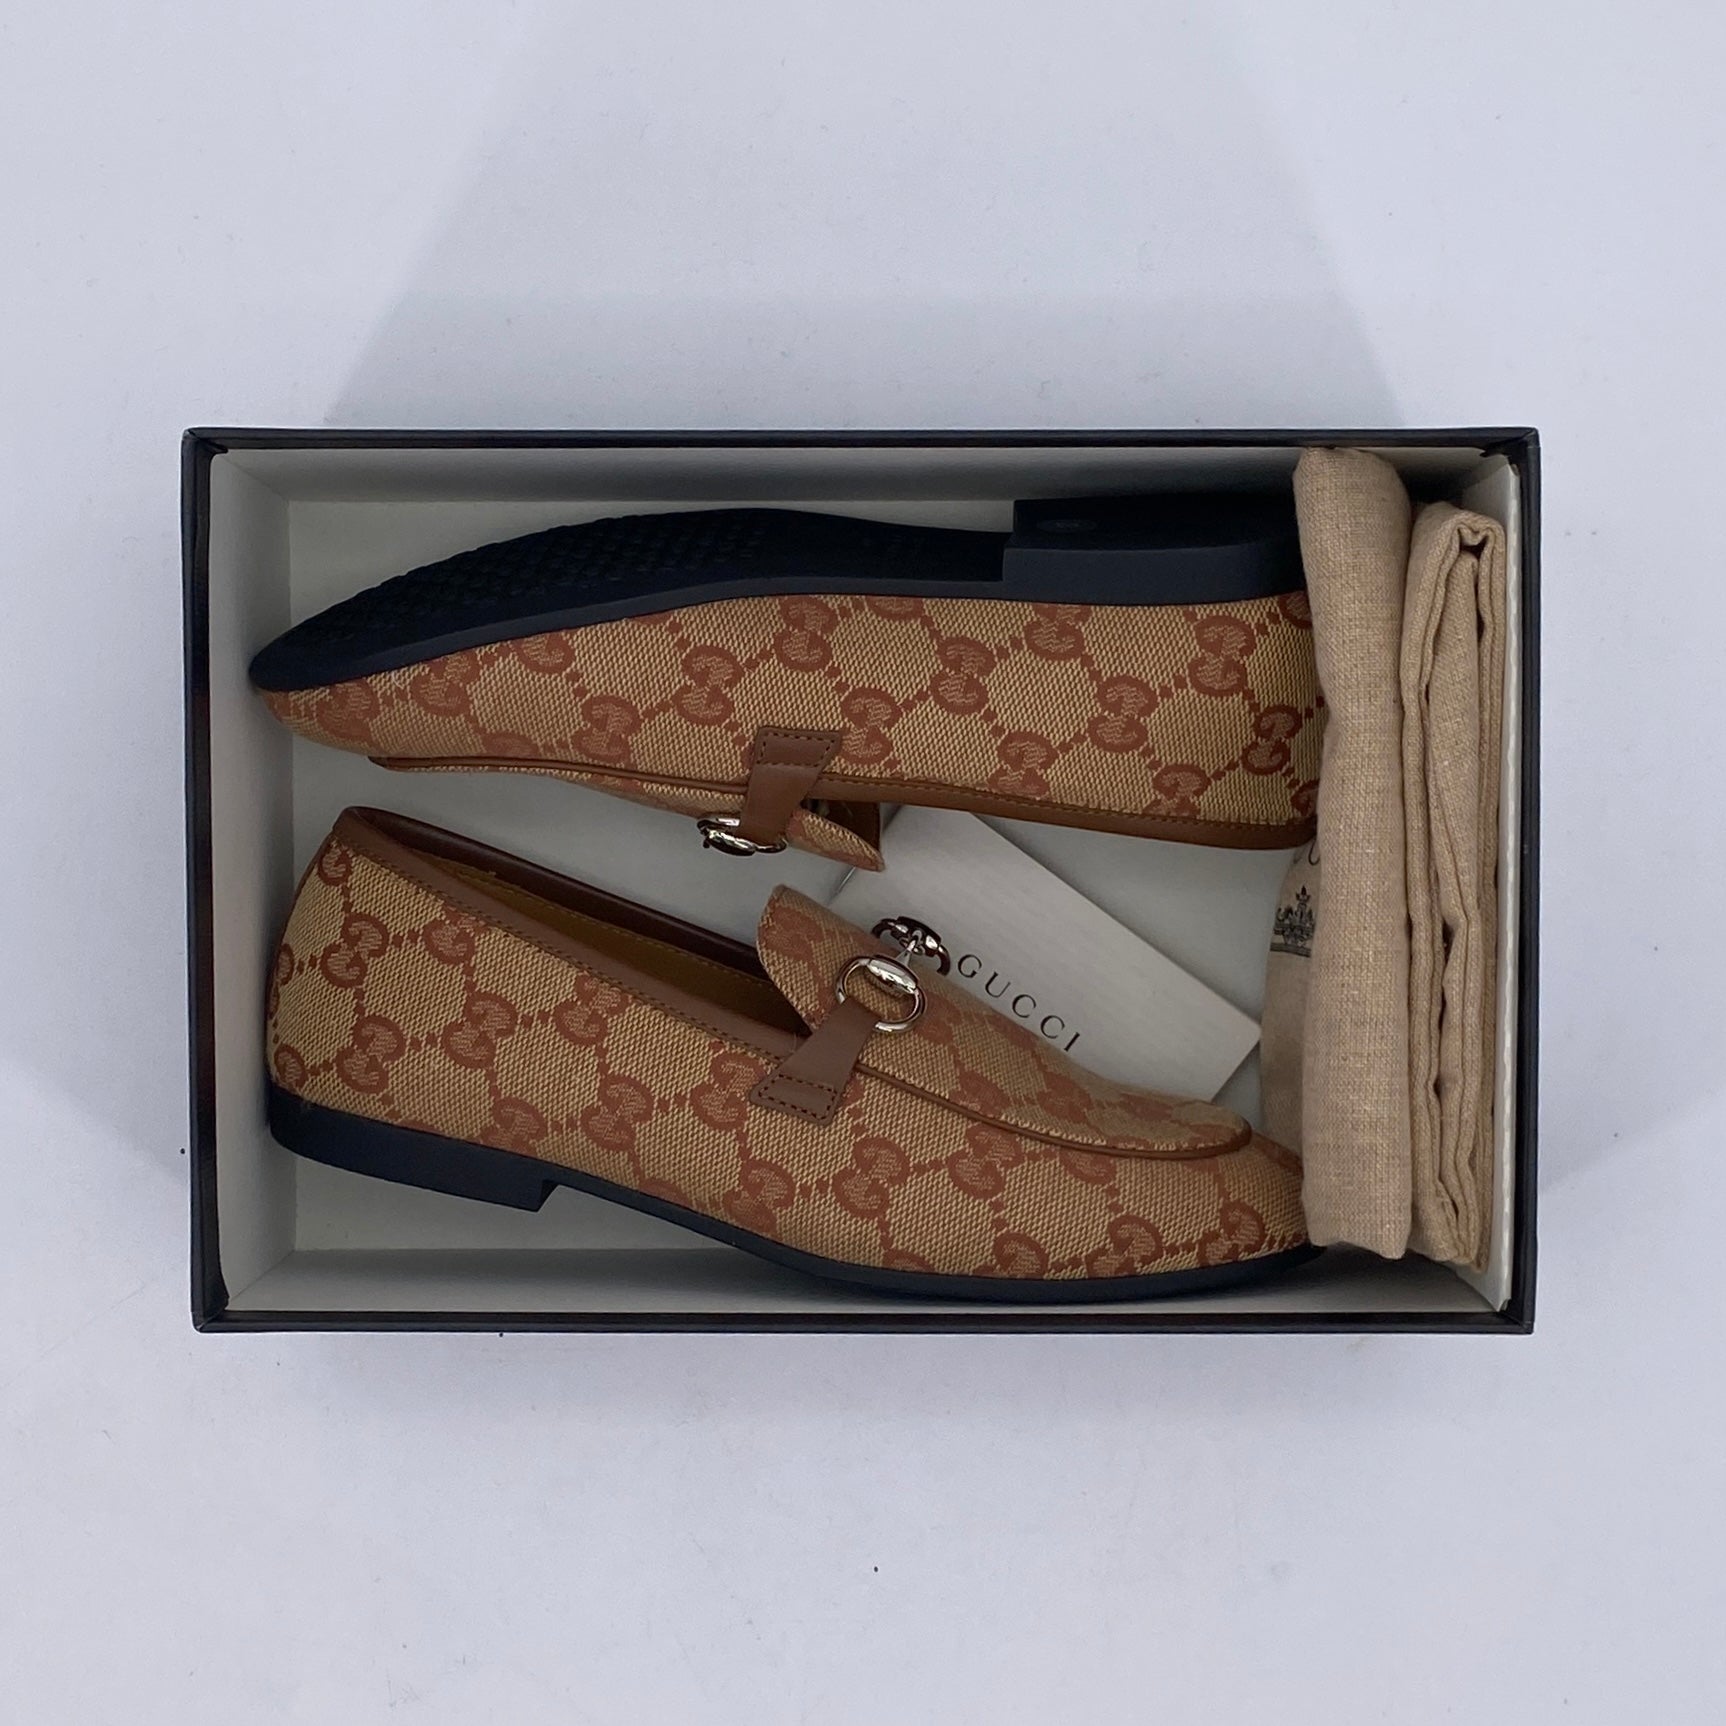 Gucci Loafer (Kids) "Monogram"  New Size